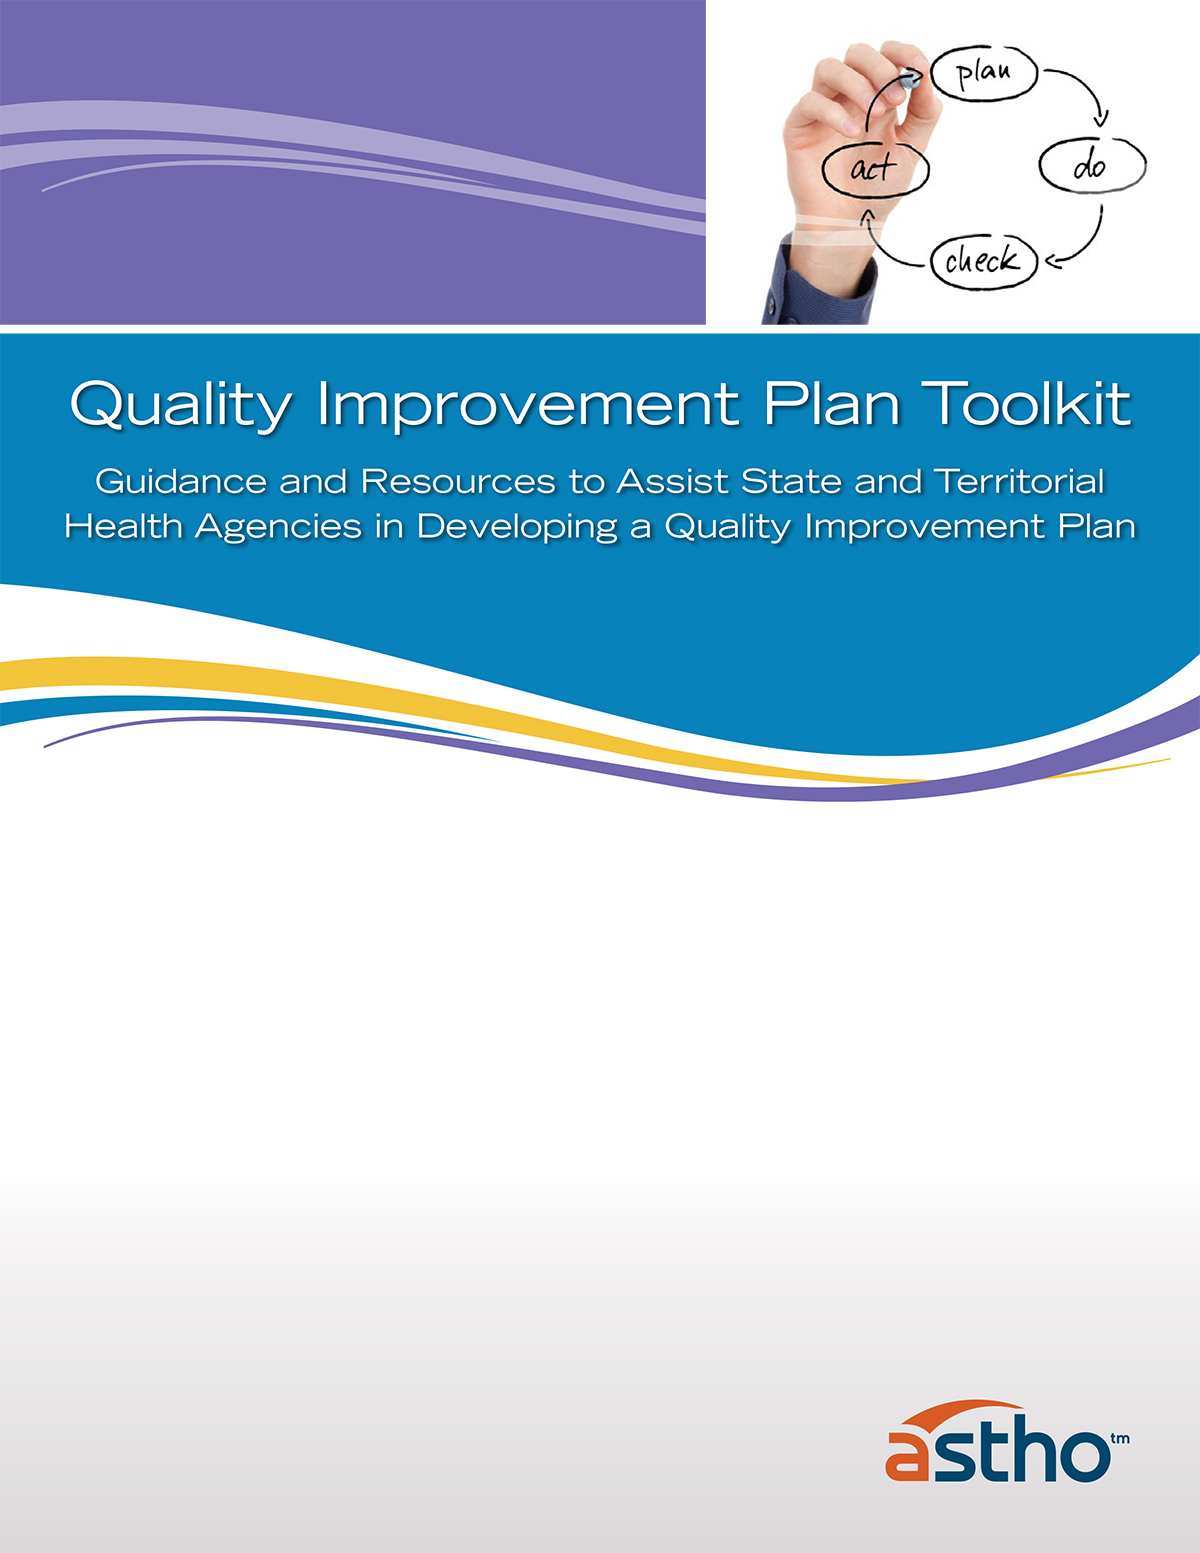 Quality Improvement Plan Toolkit: Guidance and Resources to Assist State and Territorial Health Agencies in Developing a Quality Improvement Plan